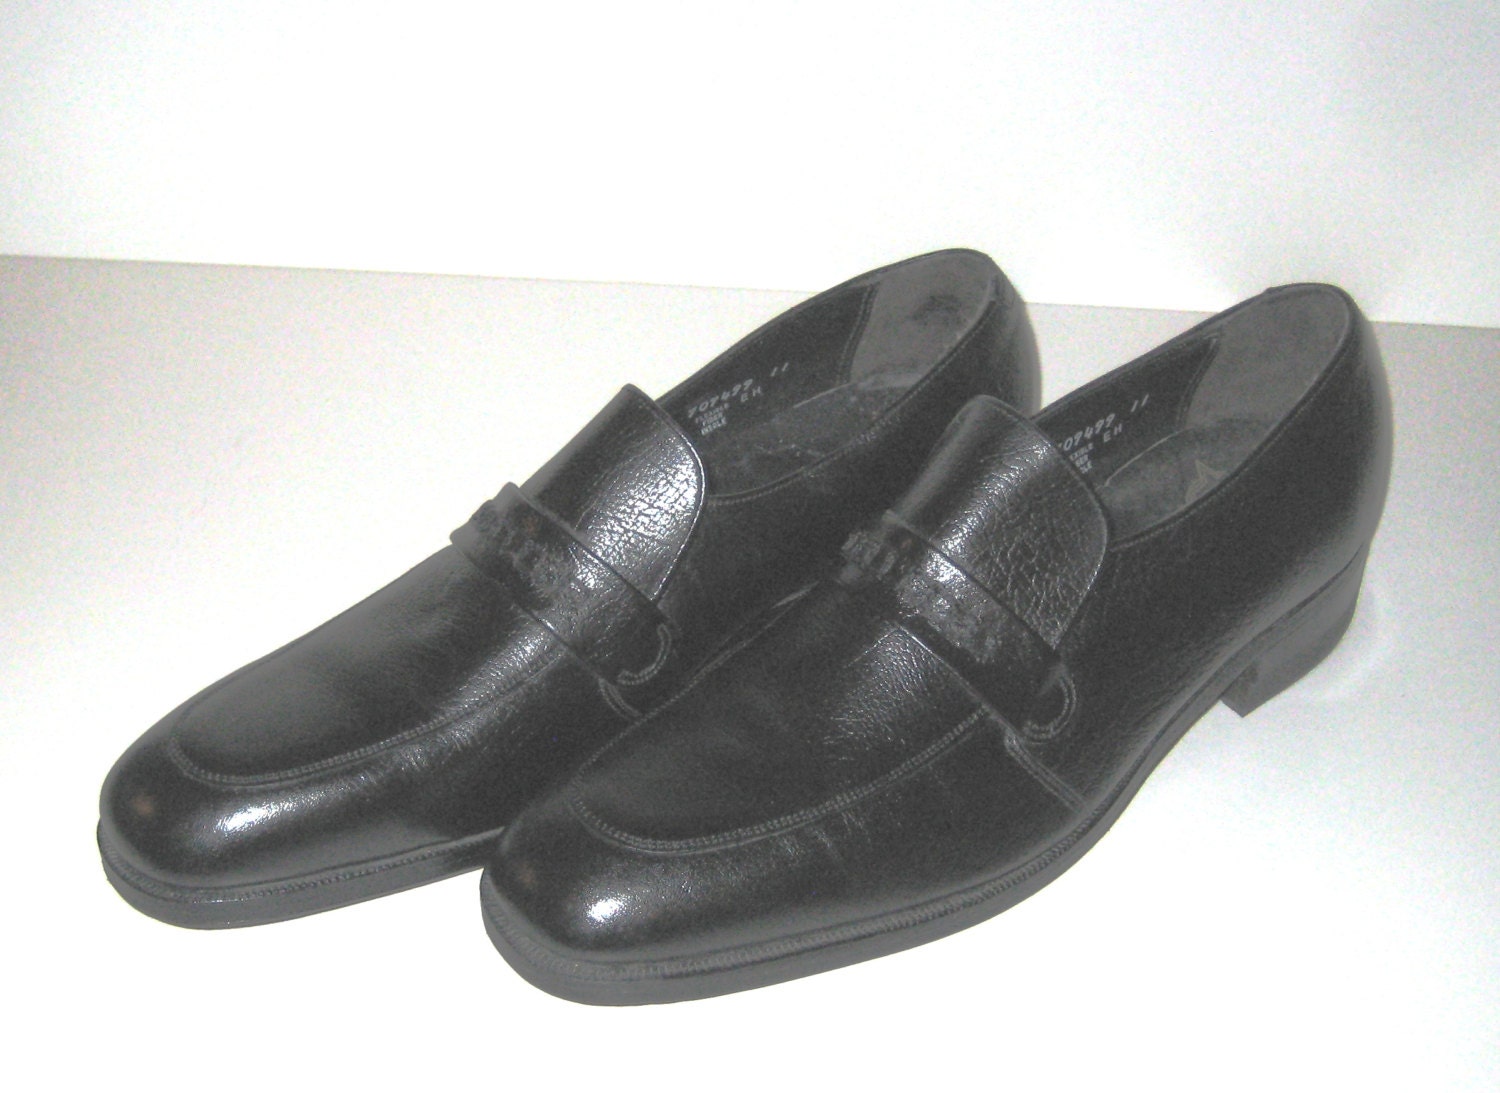 1980s Shoes Mens Shoes Black Loafers Florsheim by Bethlesvintage